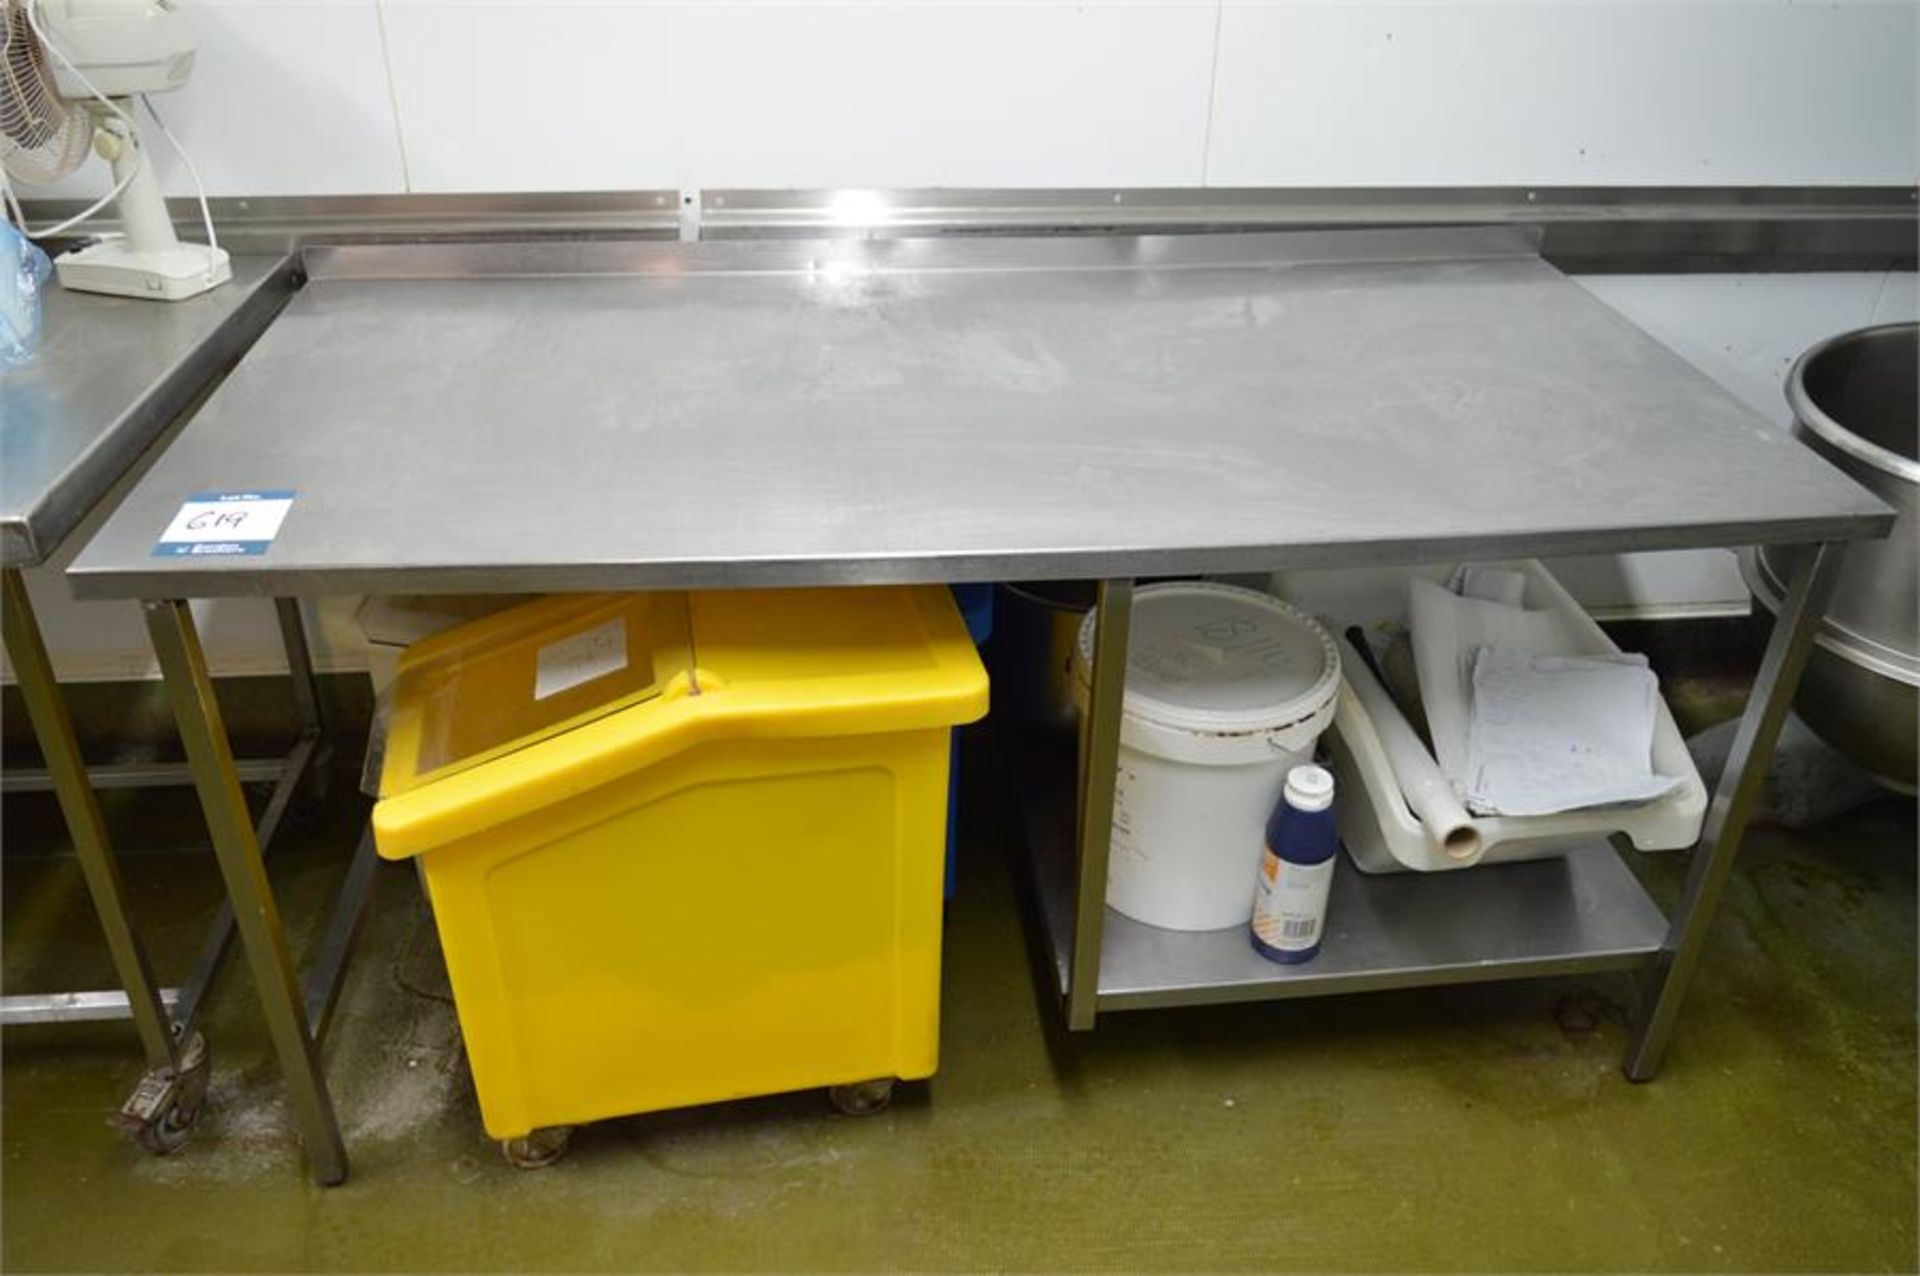 Static, stainless steel prep table with integrated shelf, 1.78m (w) x 0.84m (d) x 0.84m (h) (Located